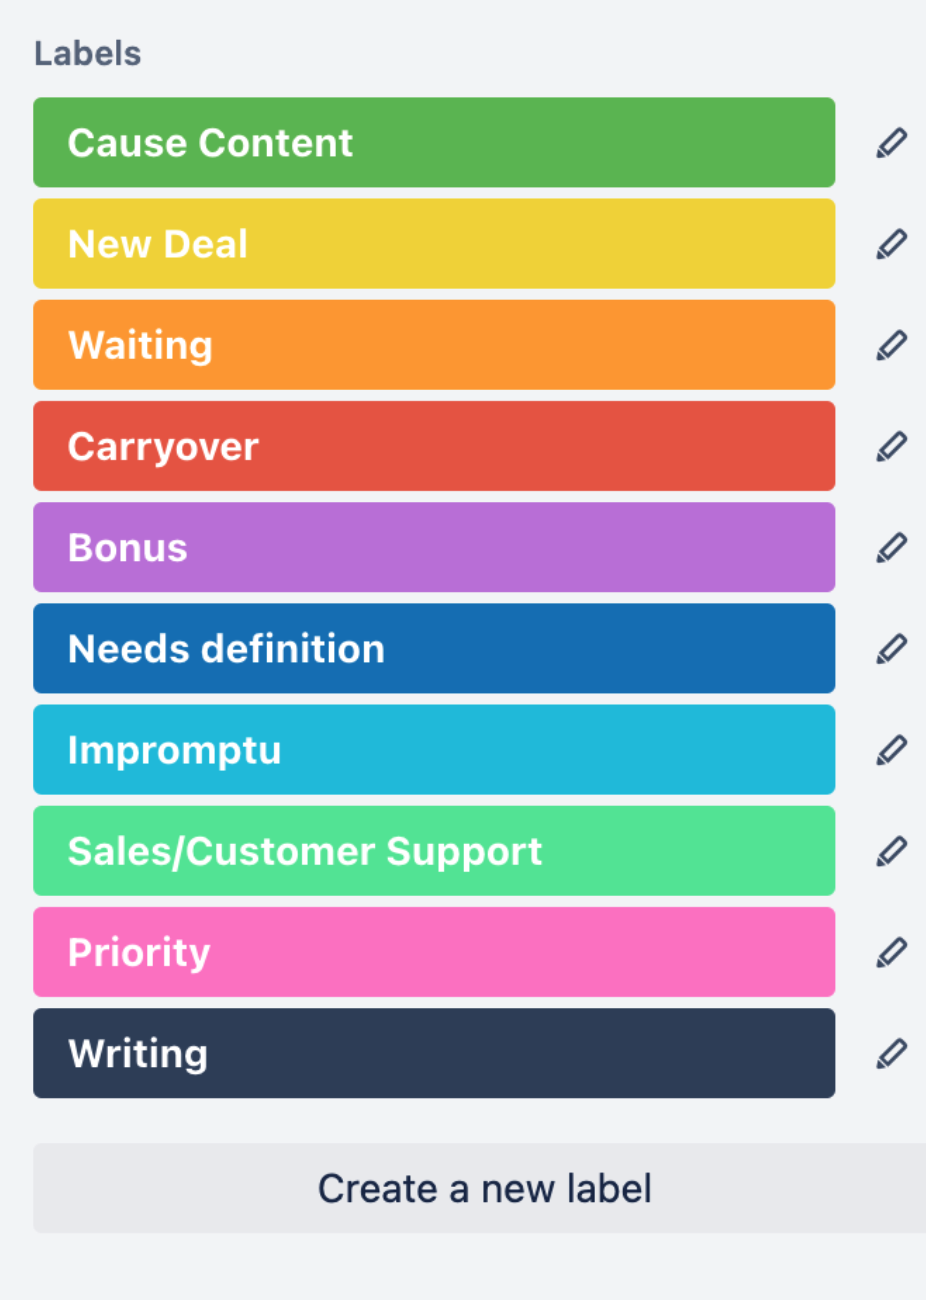 screenshot of a list of labels in green, yellow, orange, and blue with different categories, such as Writing, Waiting, New Deal, etc.